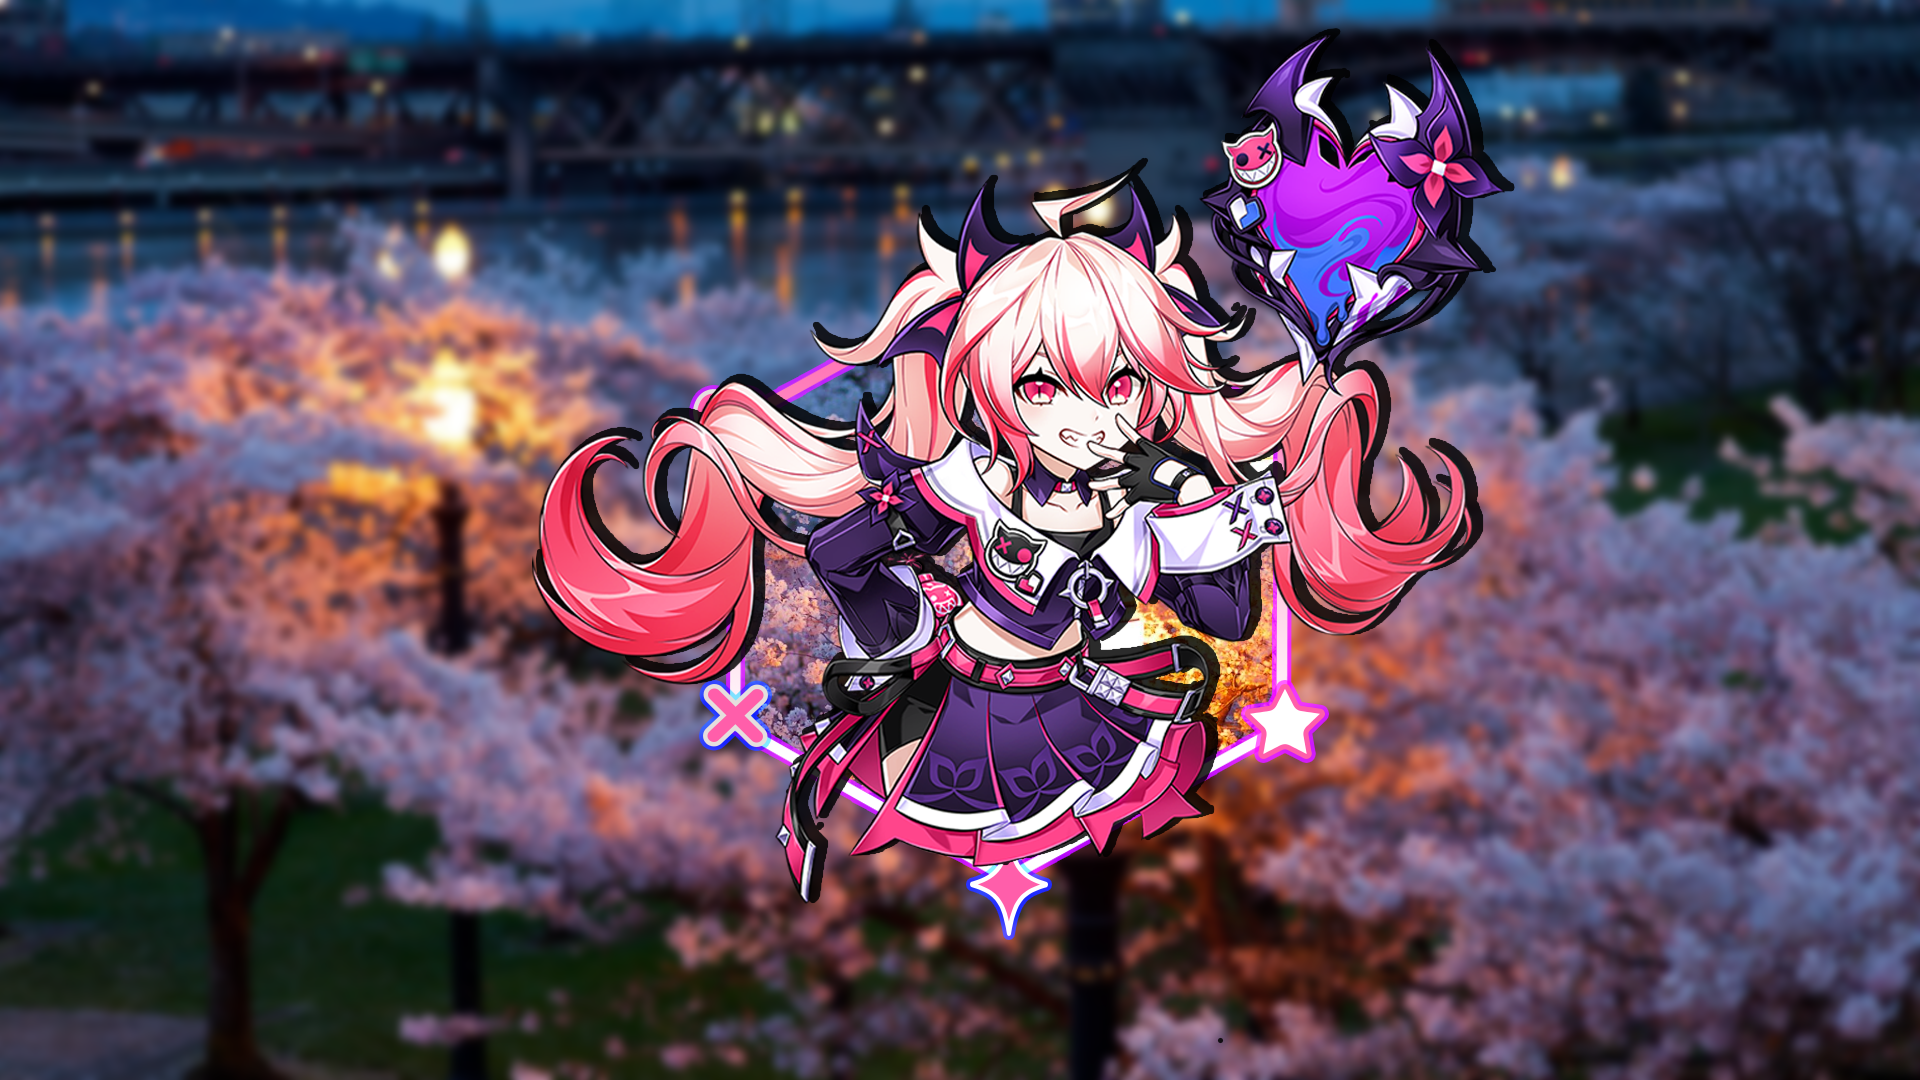 Cherry Blossom Night Picture In Picture Elsword Laby Elsword Anime Girls 1920x1080